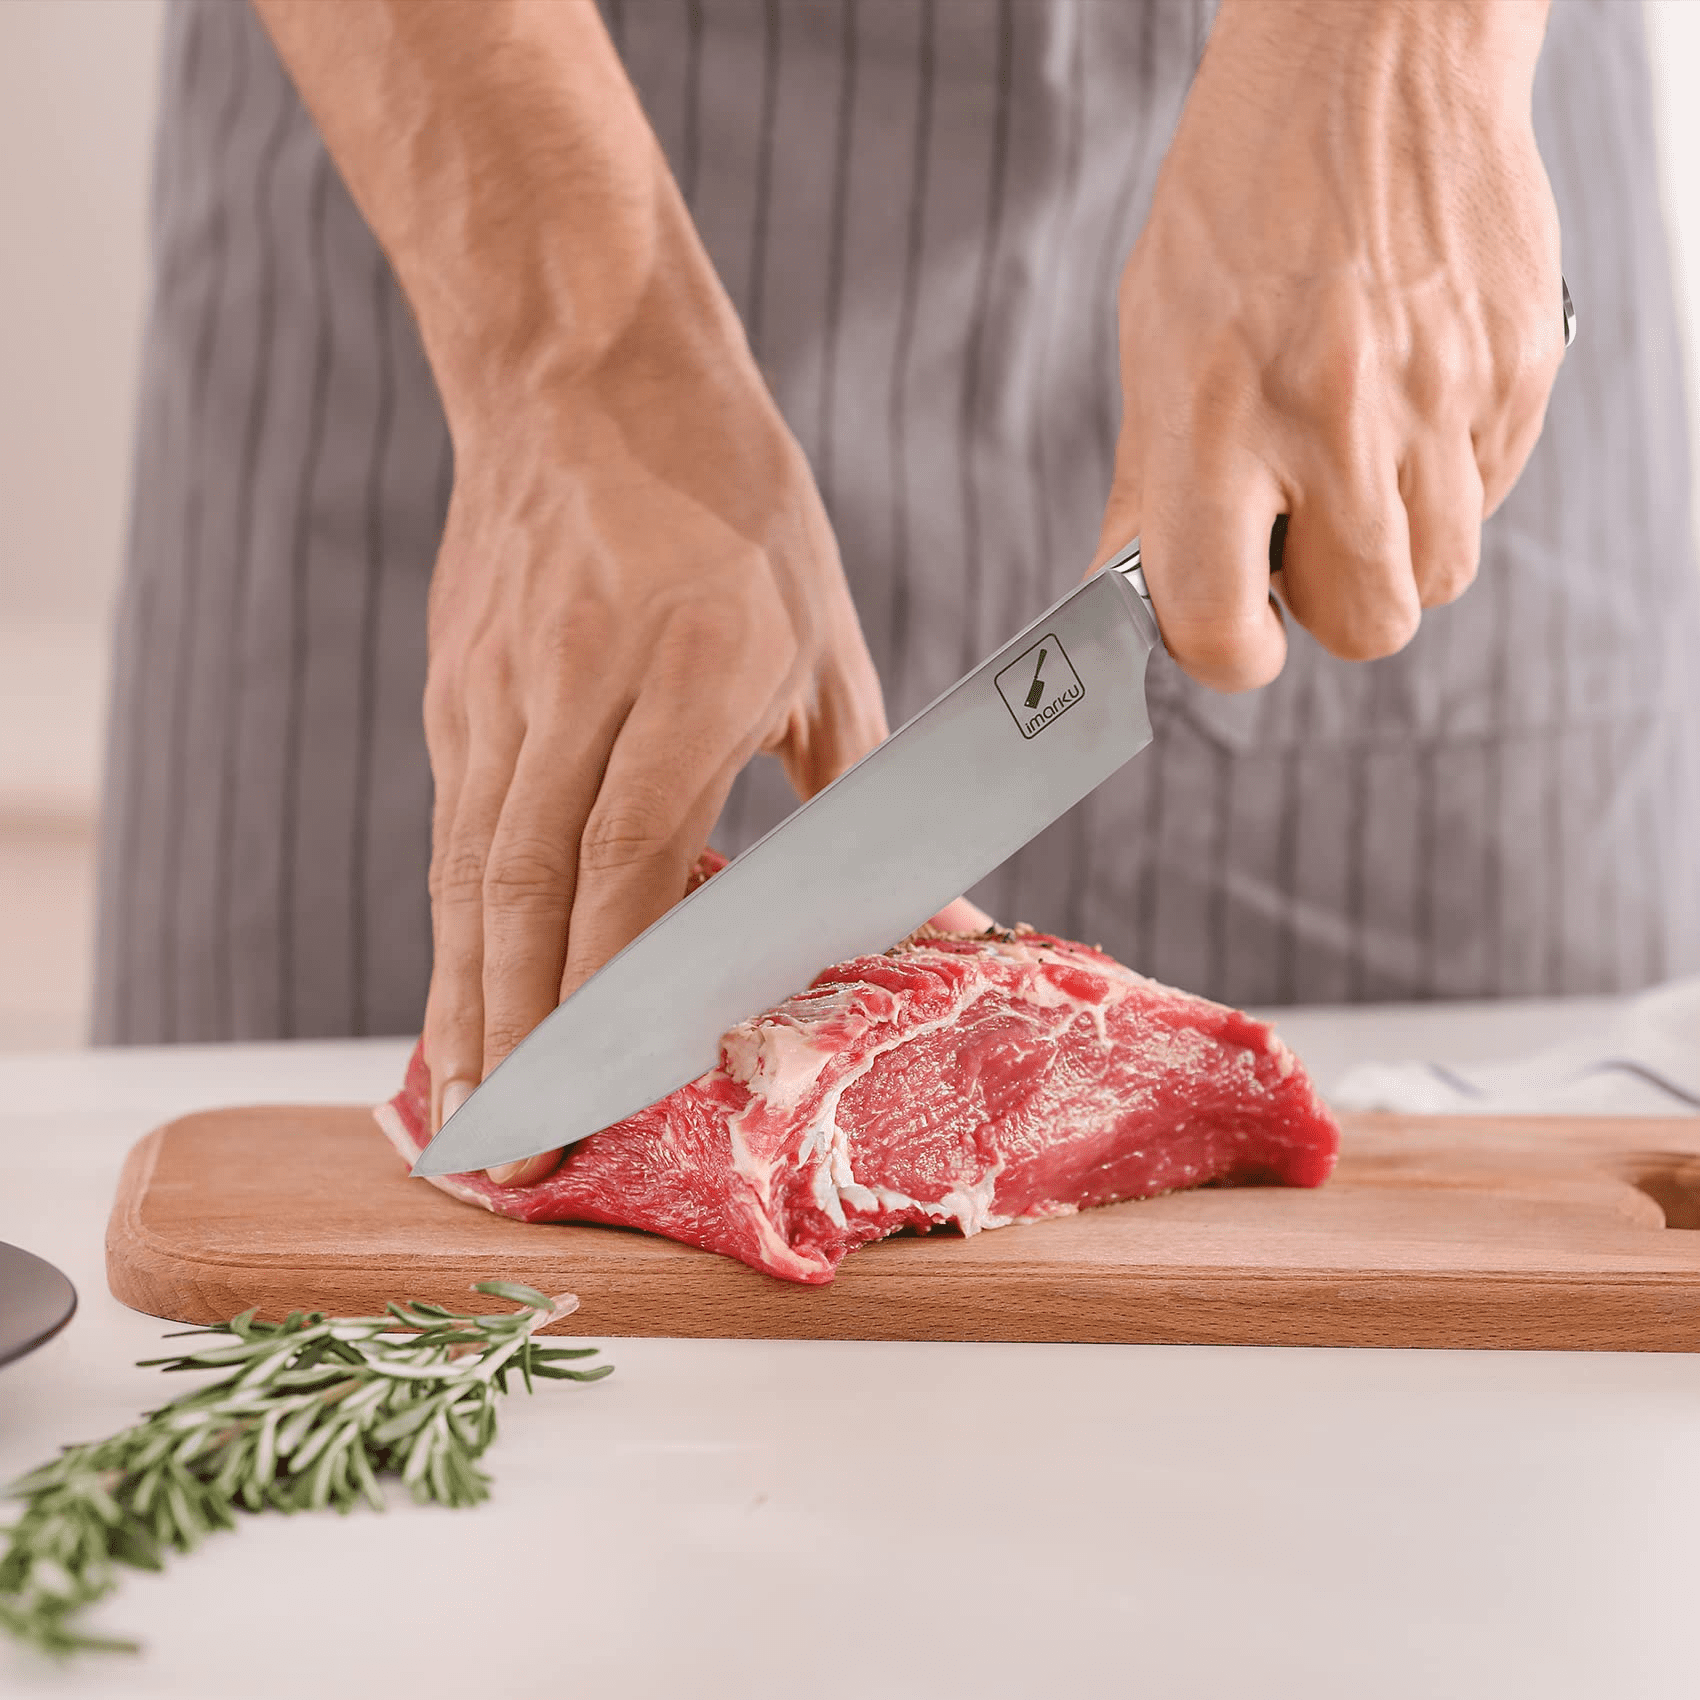 imarku Chef Knife 8 inch, High-Carbon Stainless Steel Pro Kitchen Knife  with Ergonomic Handle and Gift Box, Chef's Knives for Professional Use,  Gifts